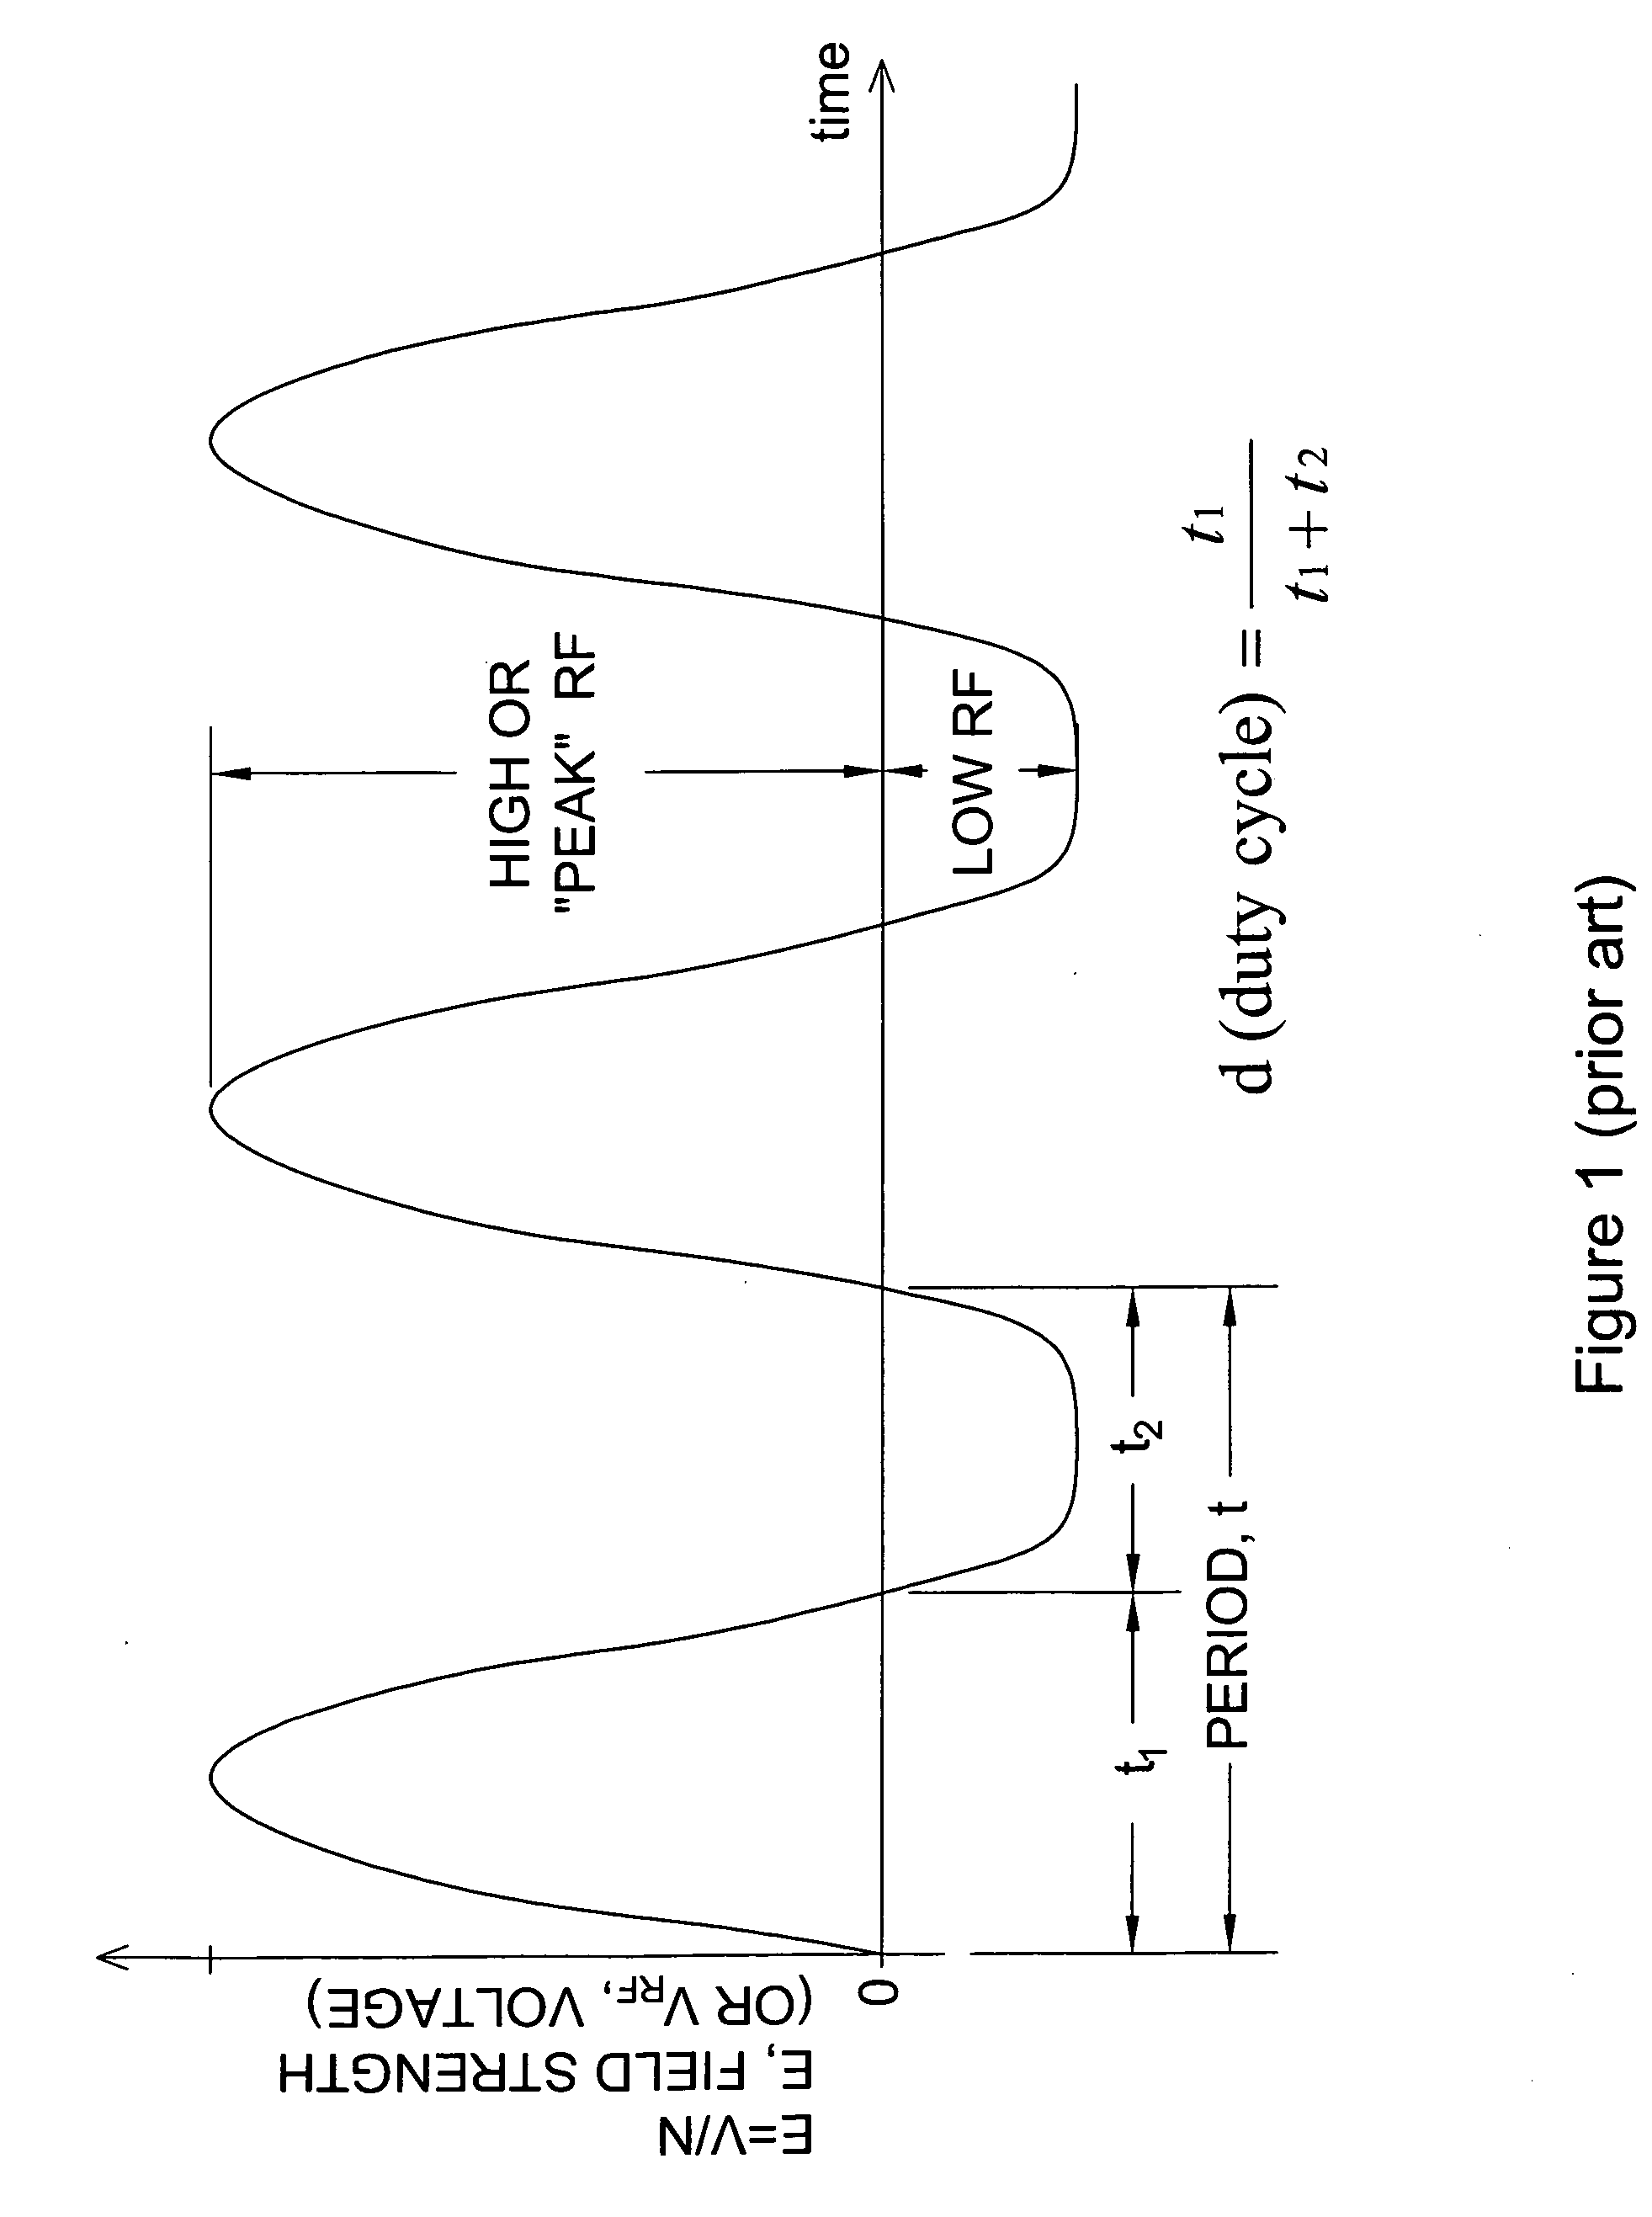 Systems and methods for ion species analysis with enhanced condition control and data interpretation